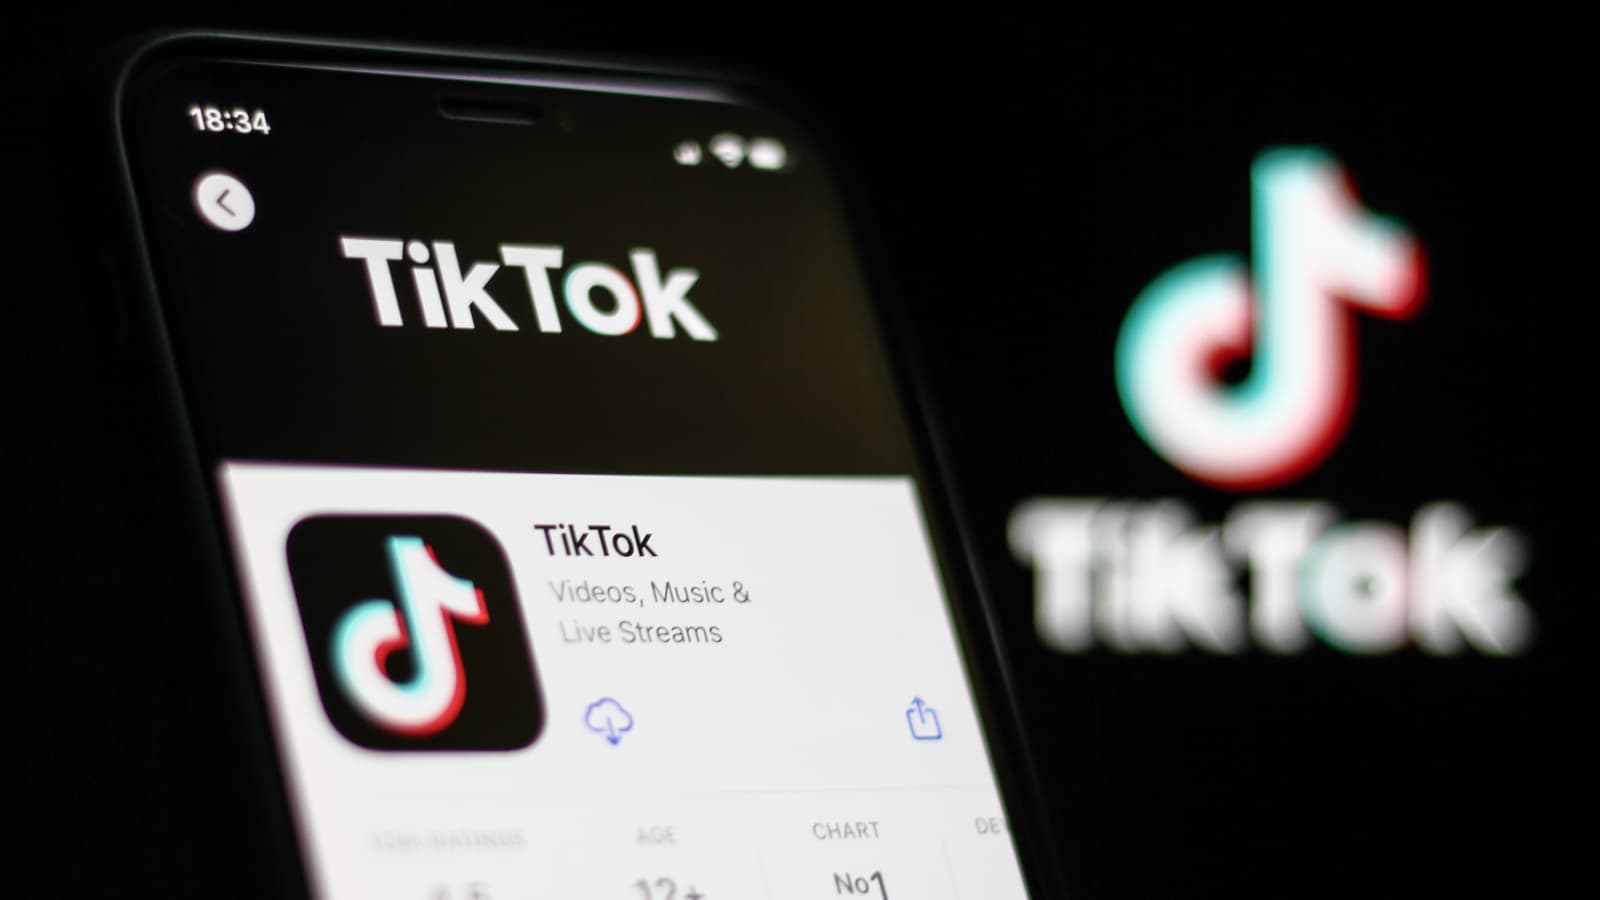 Under-18s are now subject to a daily screen time limit of 60 minutes on TikTok